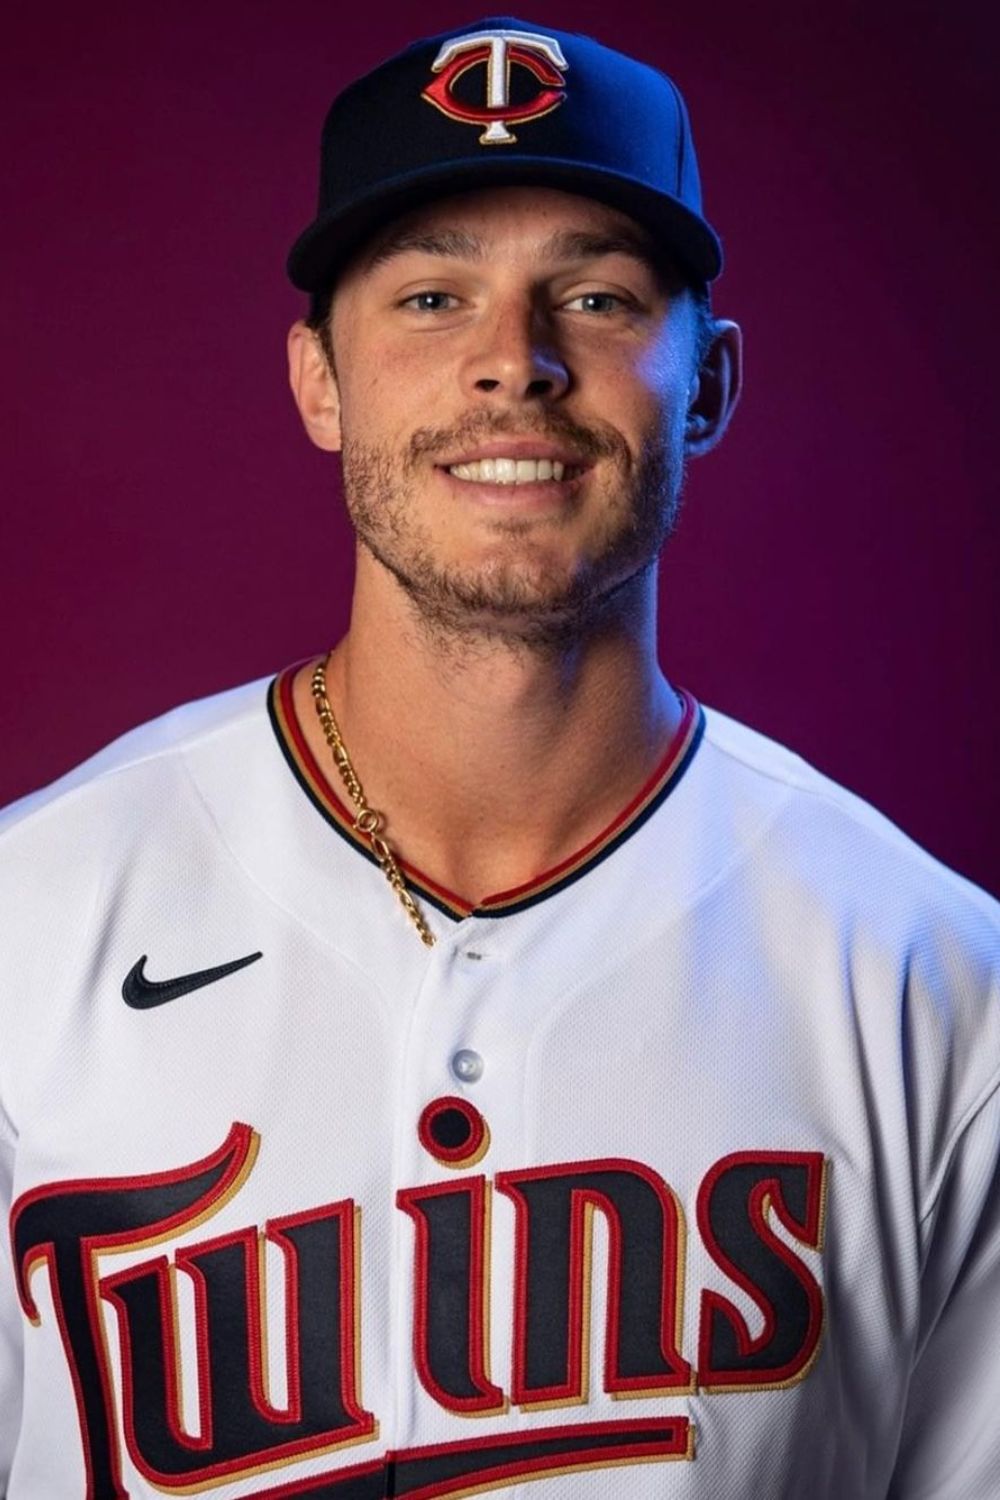 Max Kepler In A Photoshoot